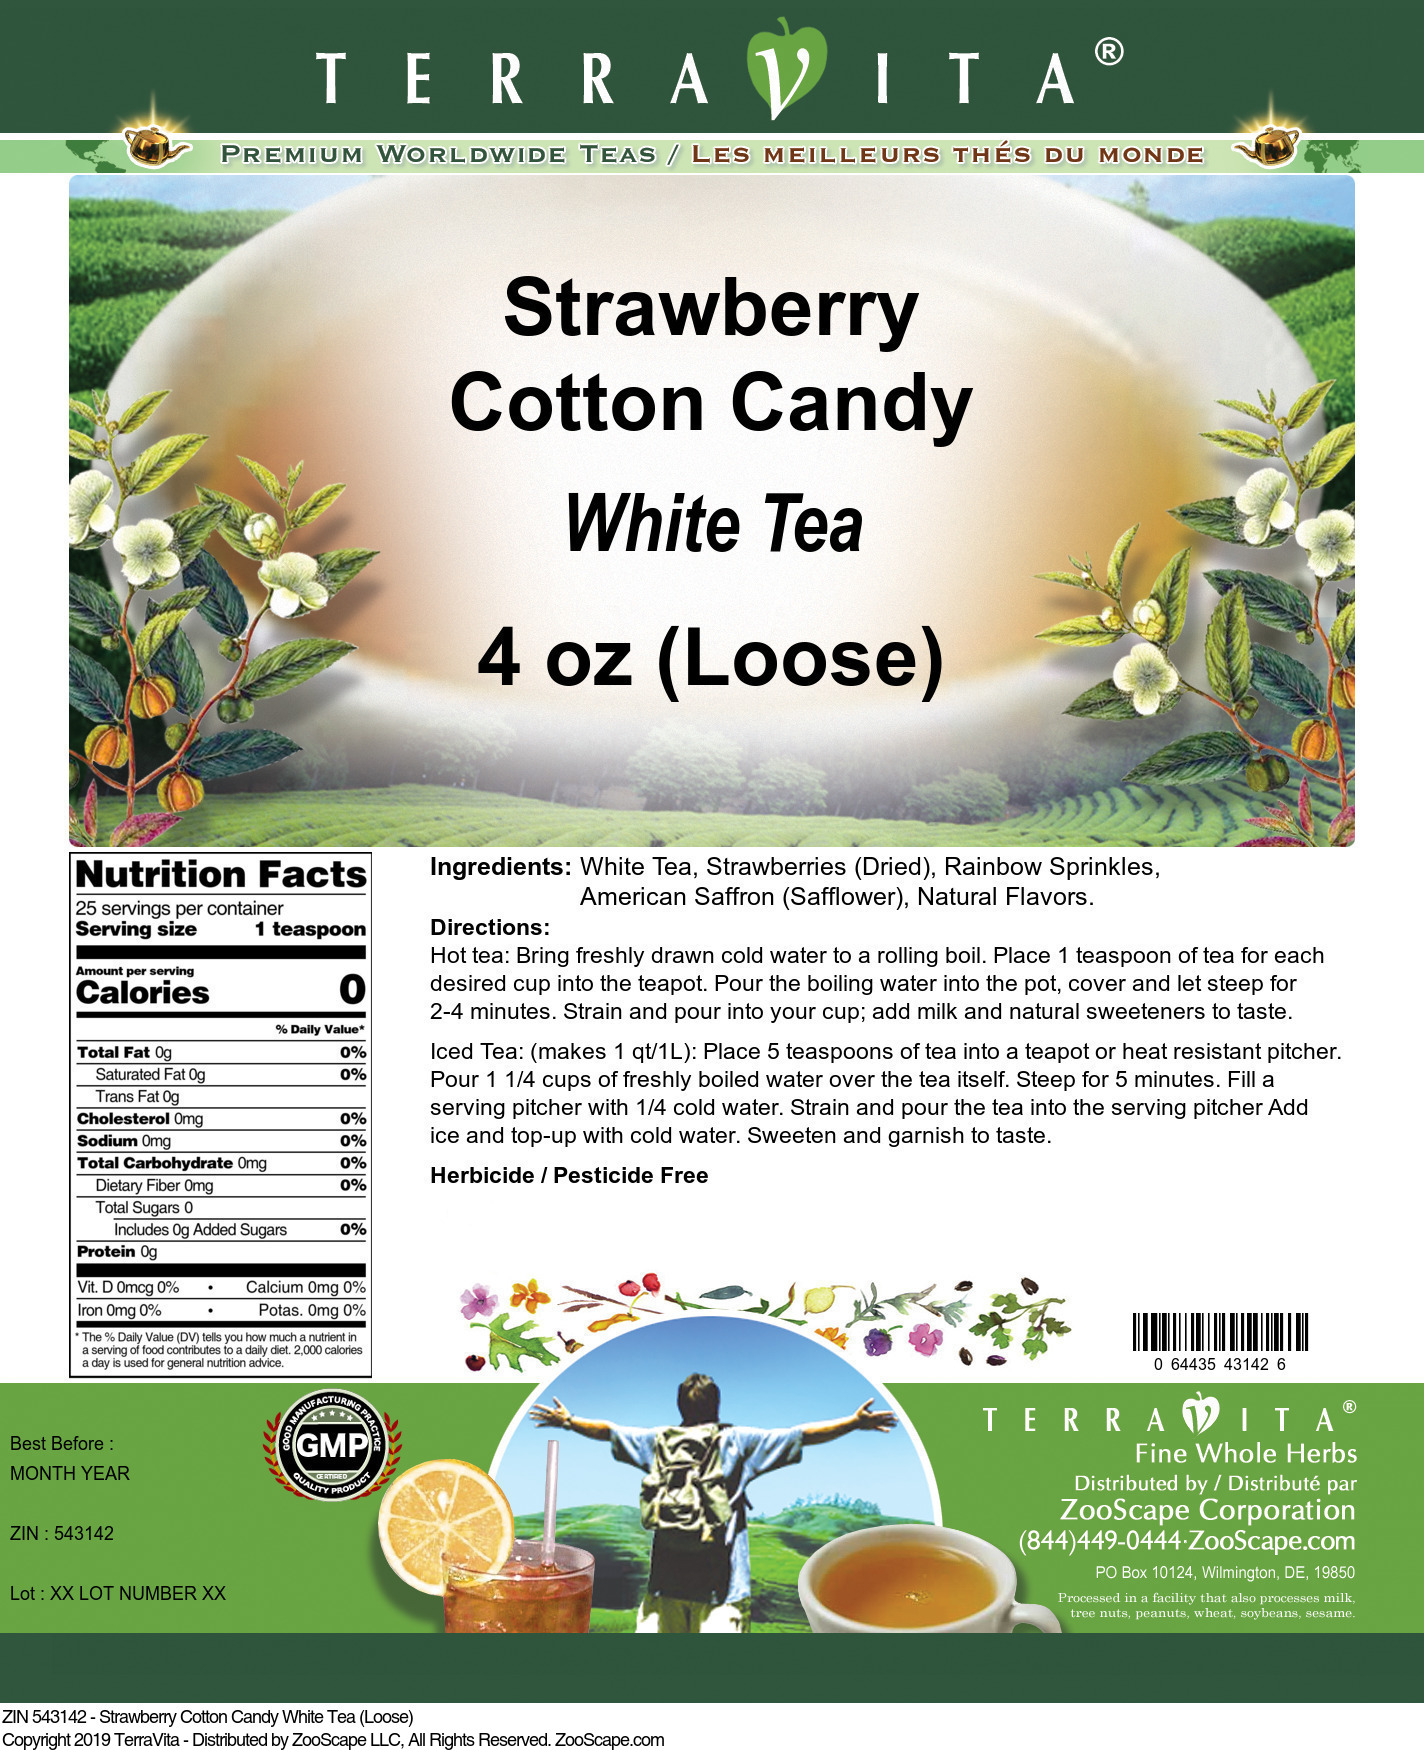 Strawberry Cotton Candy White Tea (Loose) - Label